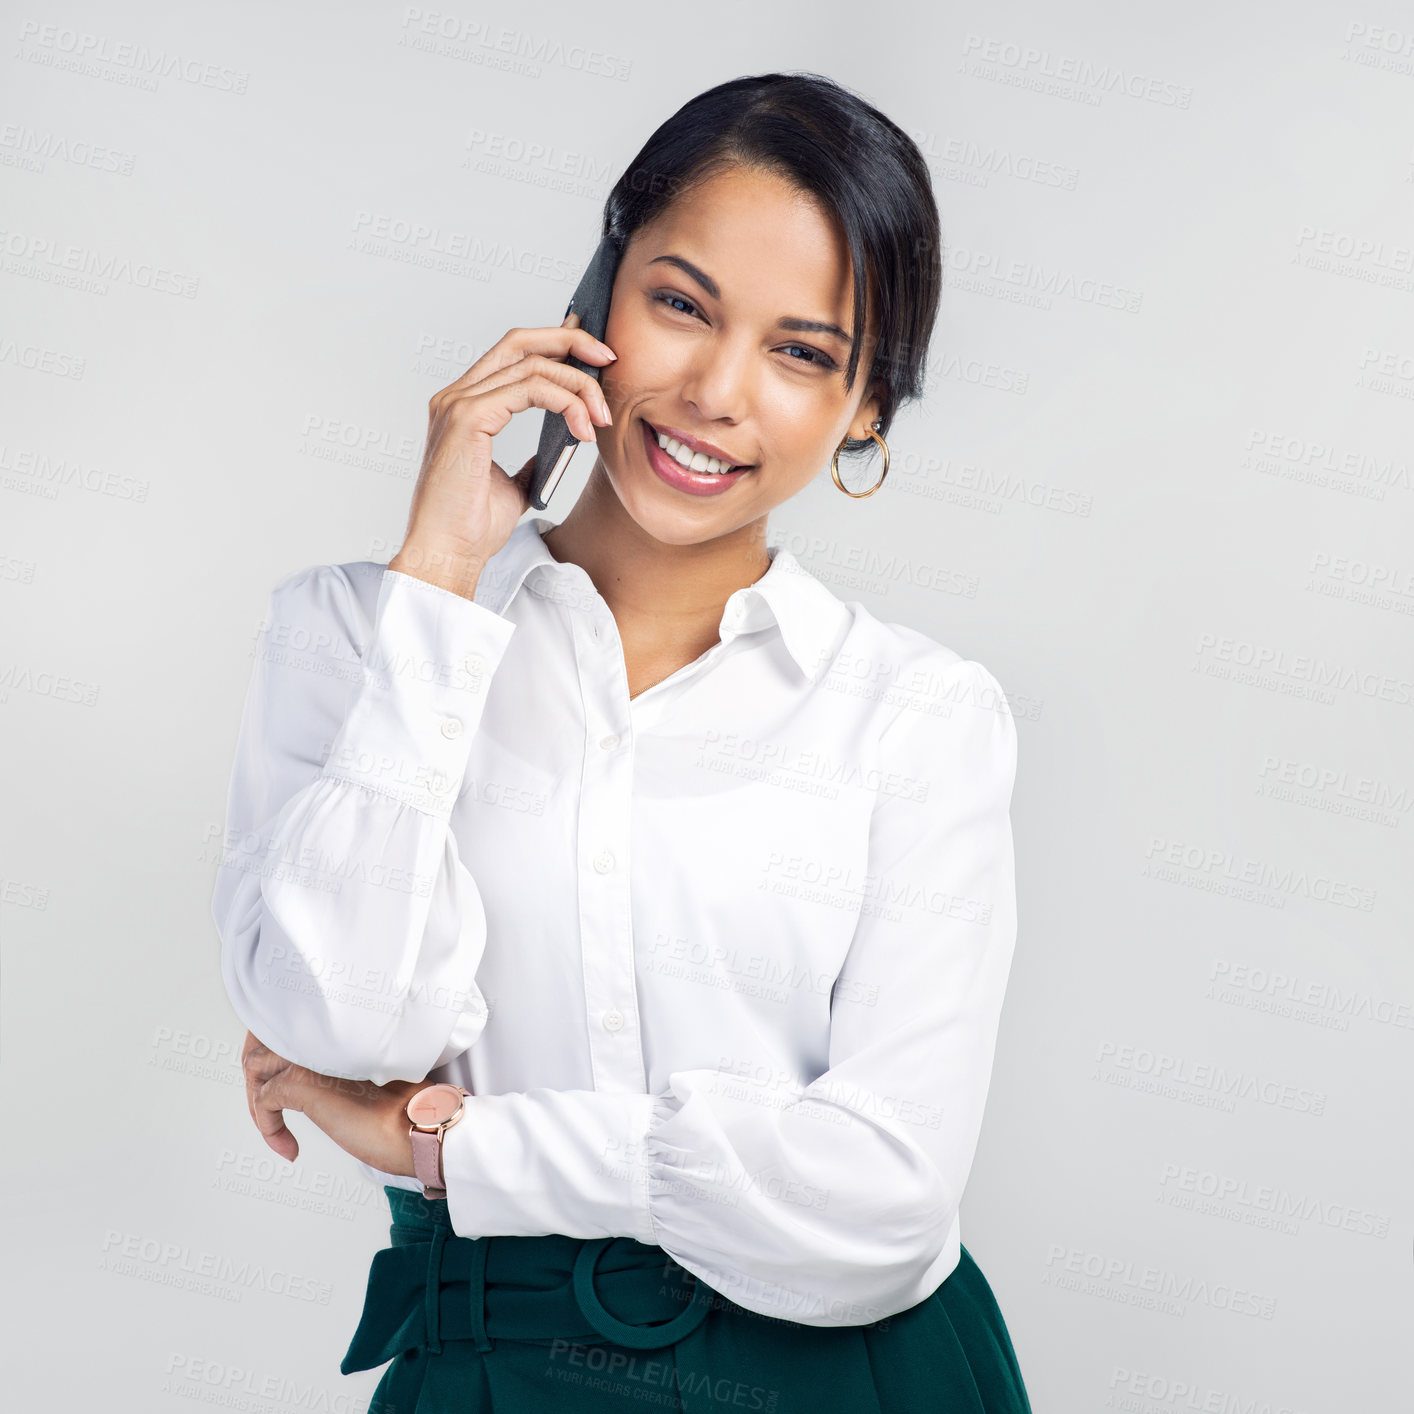 Buy stock photo Studio shot of a confident young businesswoman using a smartphone against a grey background